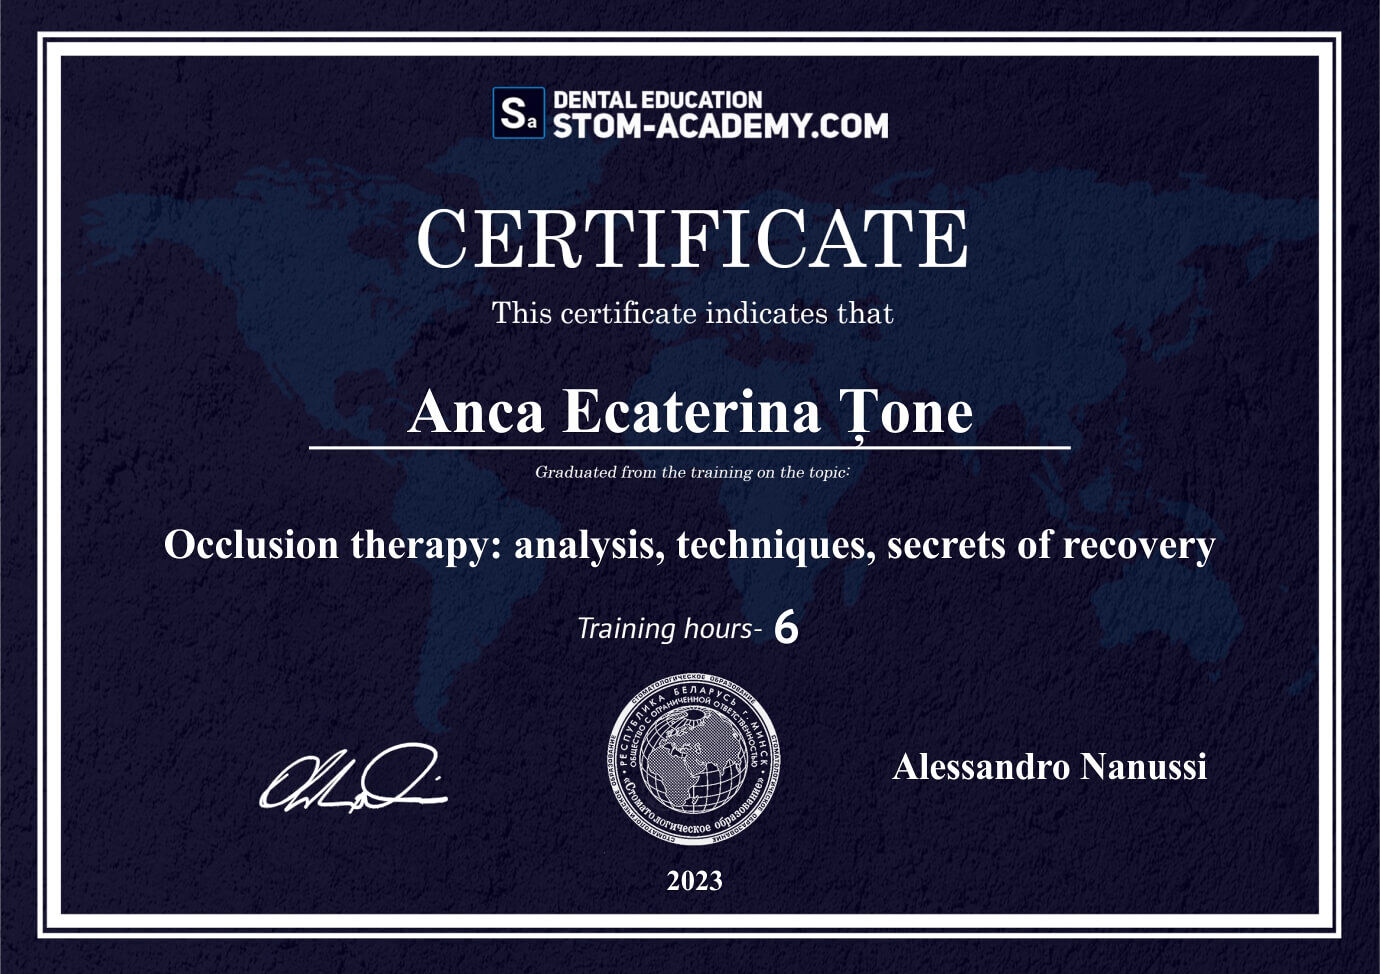 Certificate - Occlusion therapy: analysis, techniques, secrets of recovery